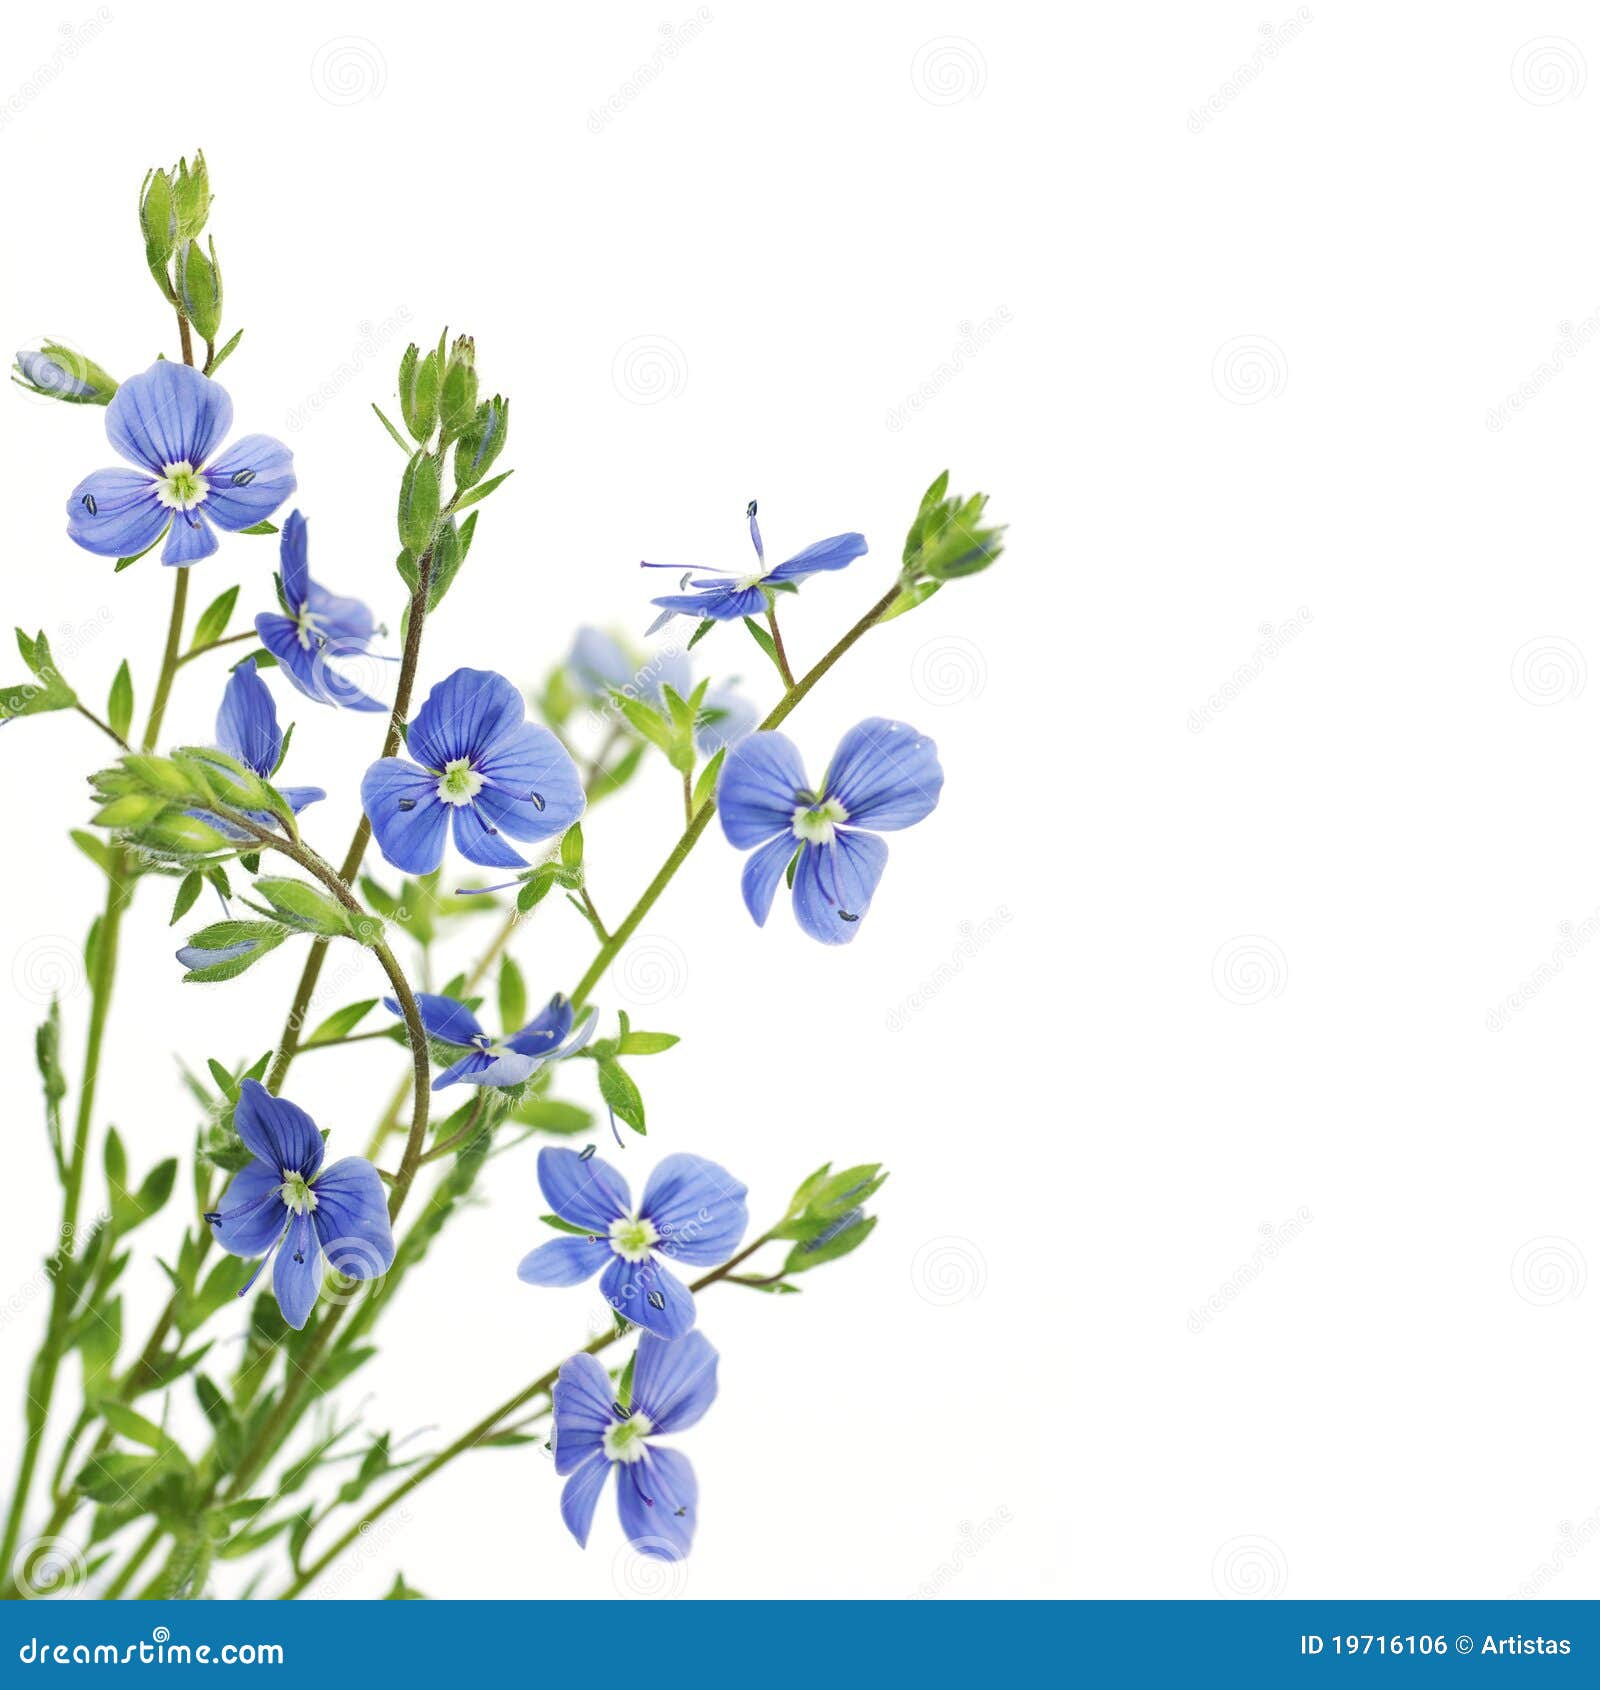 Blue Flower On A White Background Royalty Free Stock Image - Image